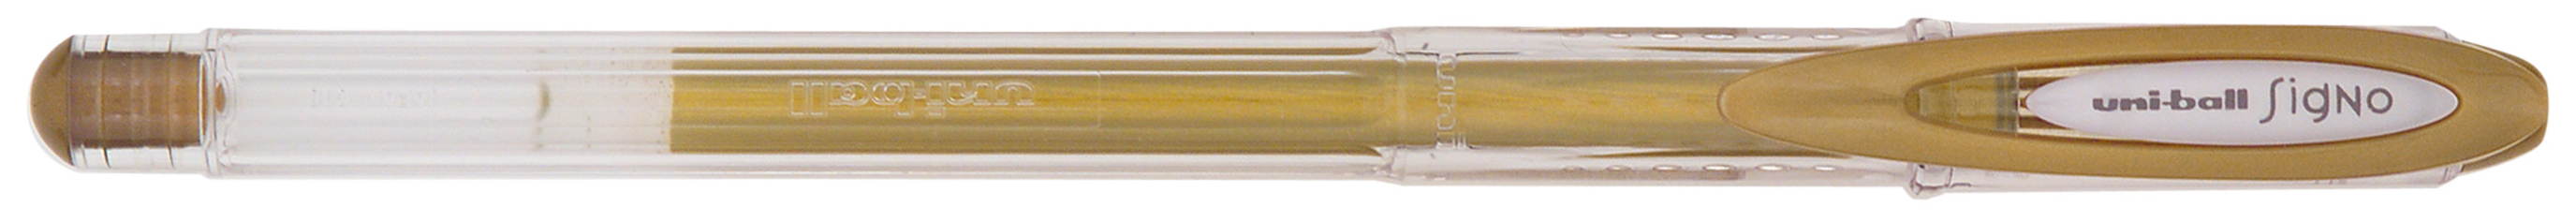 UNI-BALL Signo Noble Metal 0.8mm UM120NM GOLD or